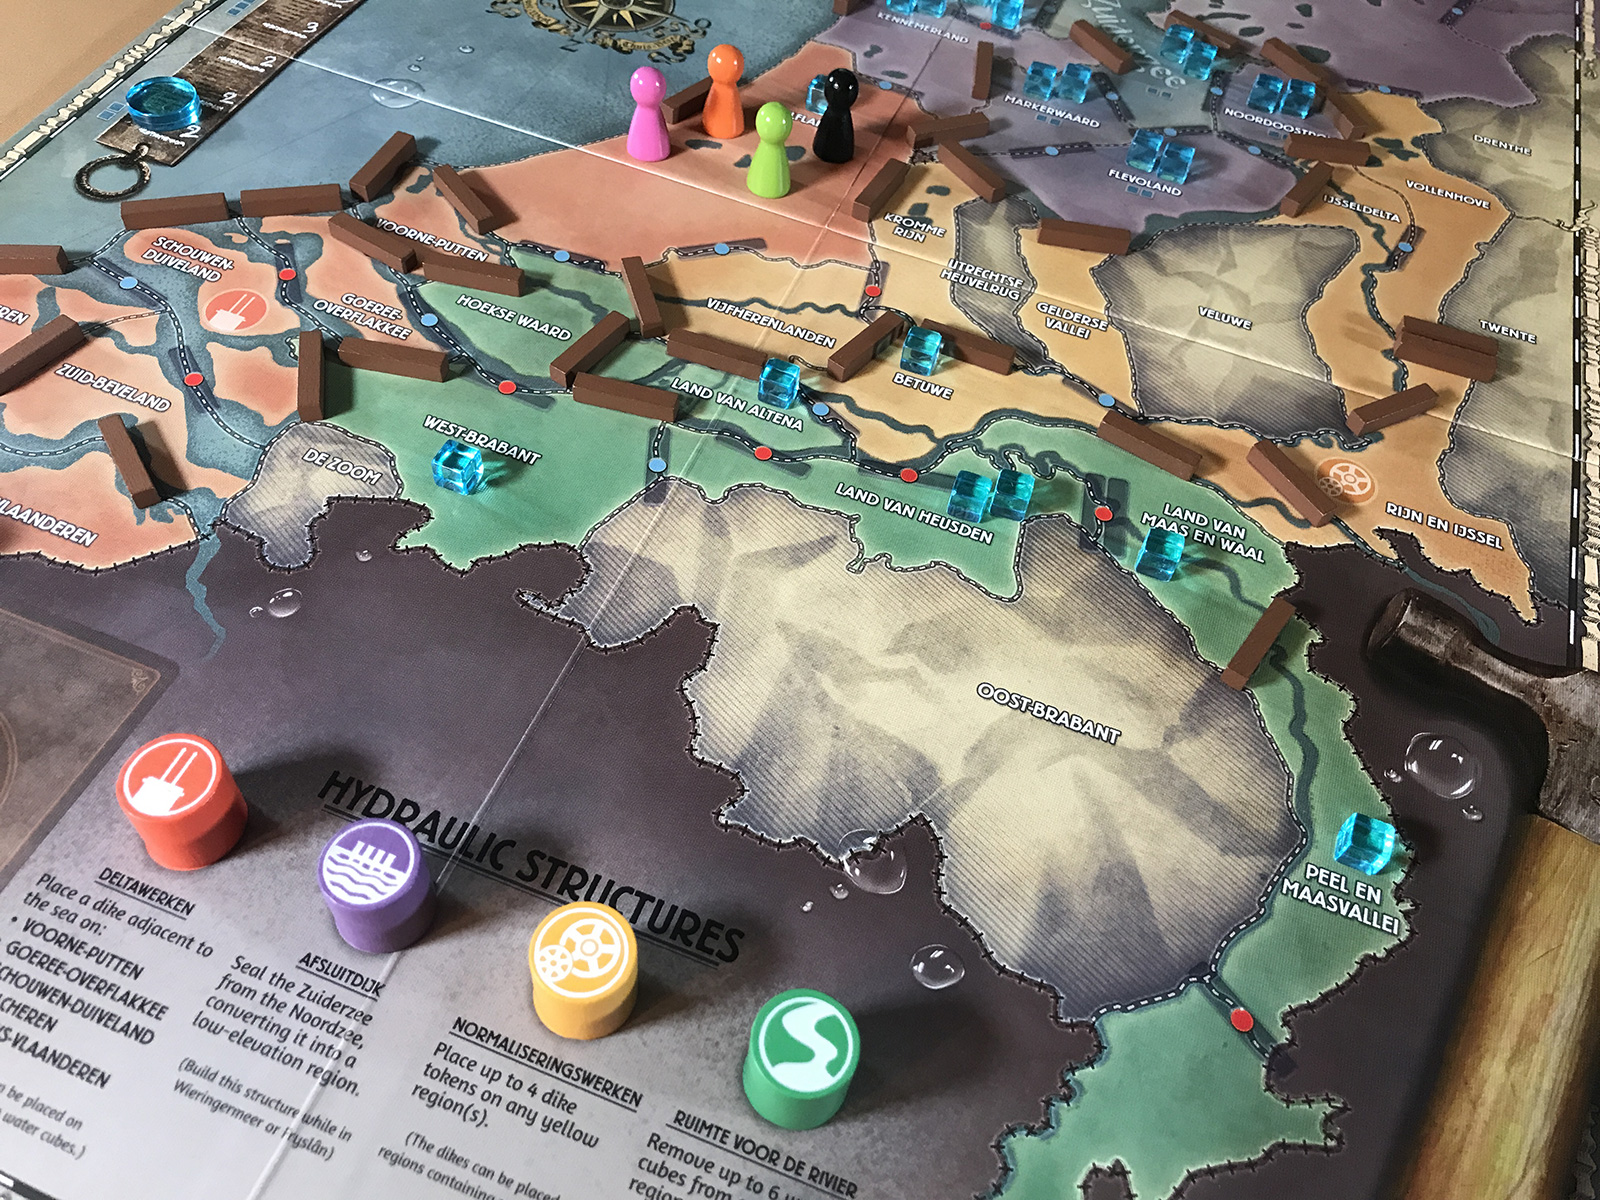 Admiring the Quality Board and Components in Pandemic: Rising Tide